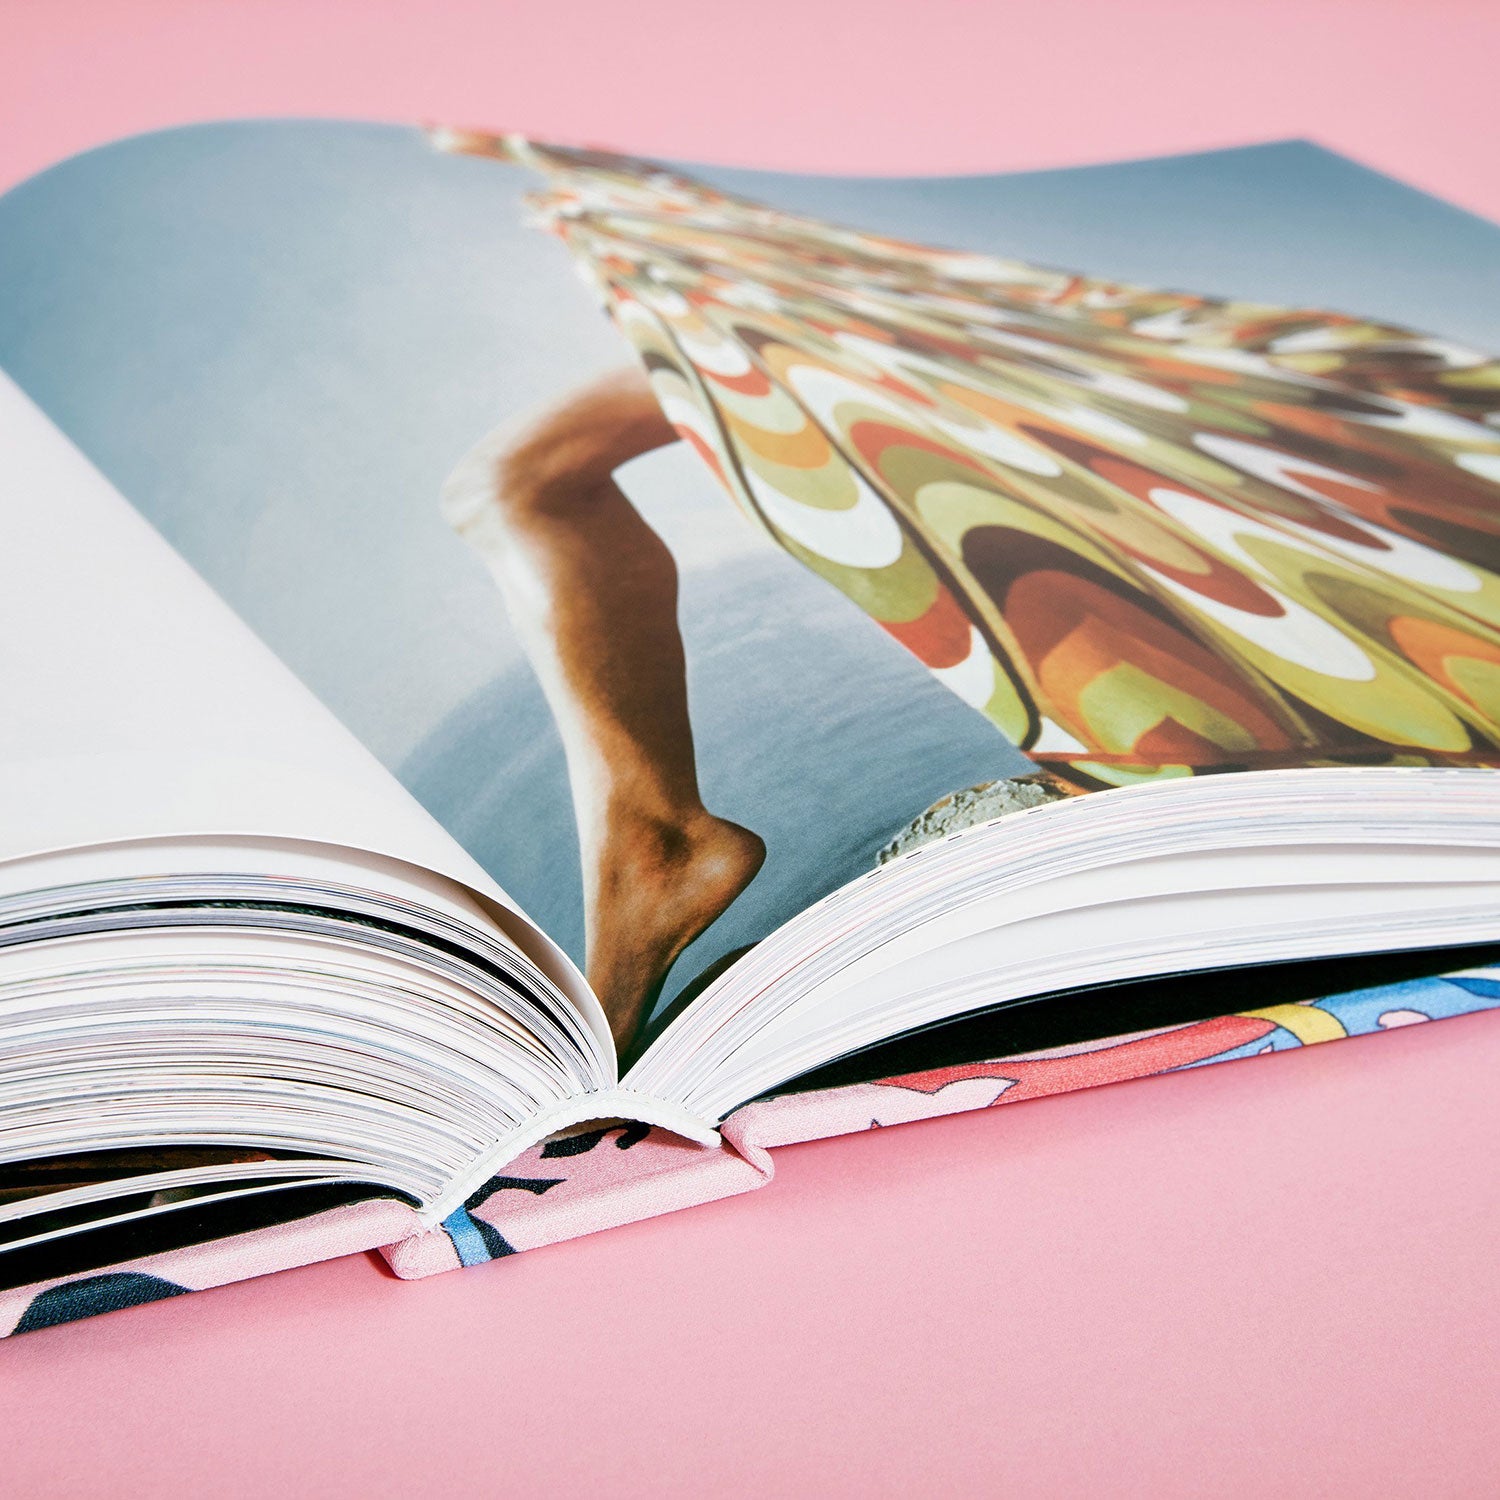 pucci updated limited edition hardcover book taschen at secret location